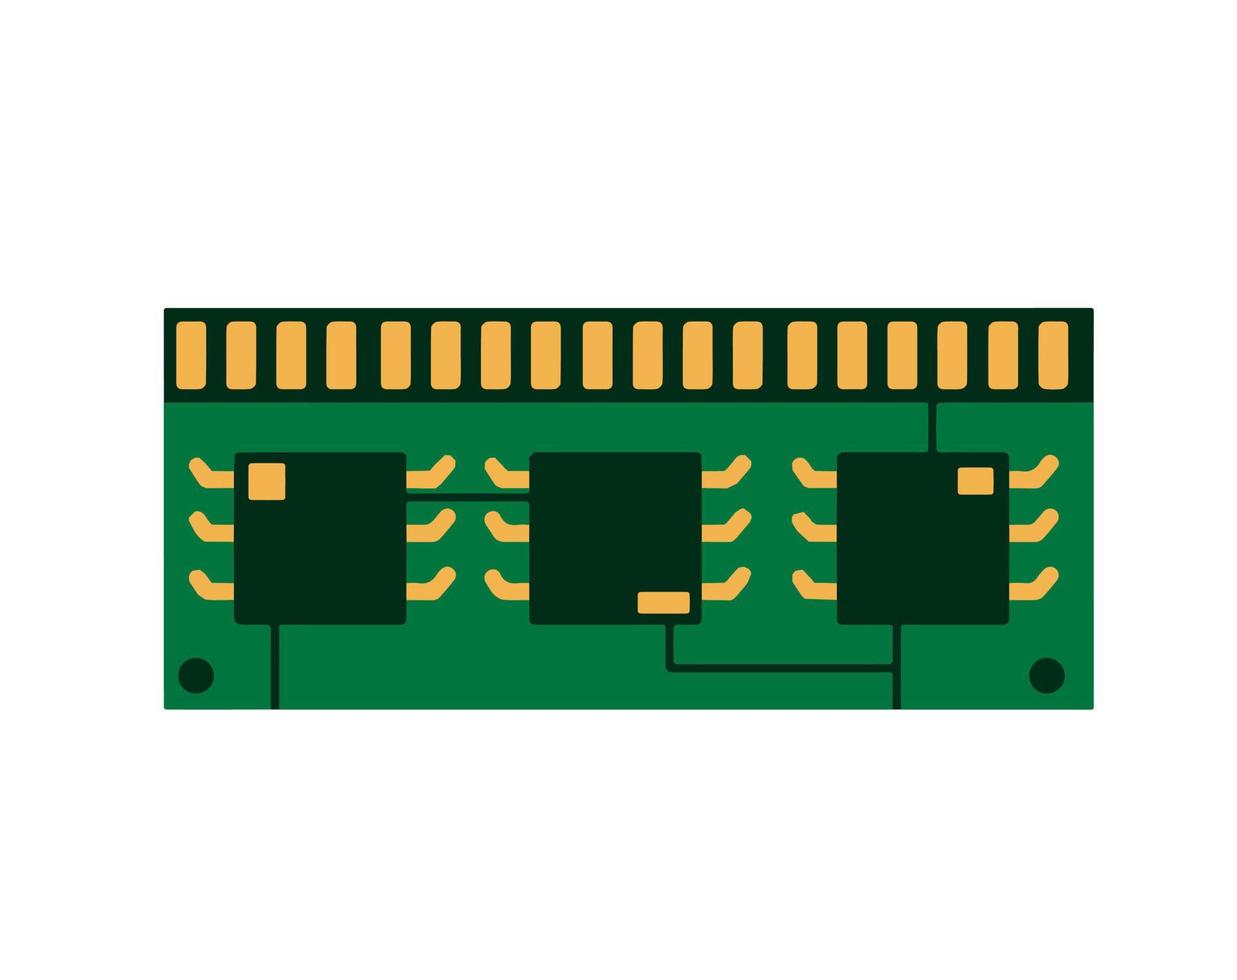 Computer Chip Hardware. Green microchip. Microprocessor and microcircuit icon. Modern technology. Flat illustration vector